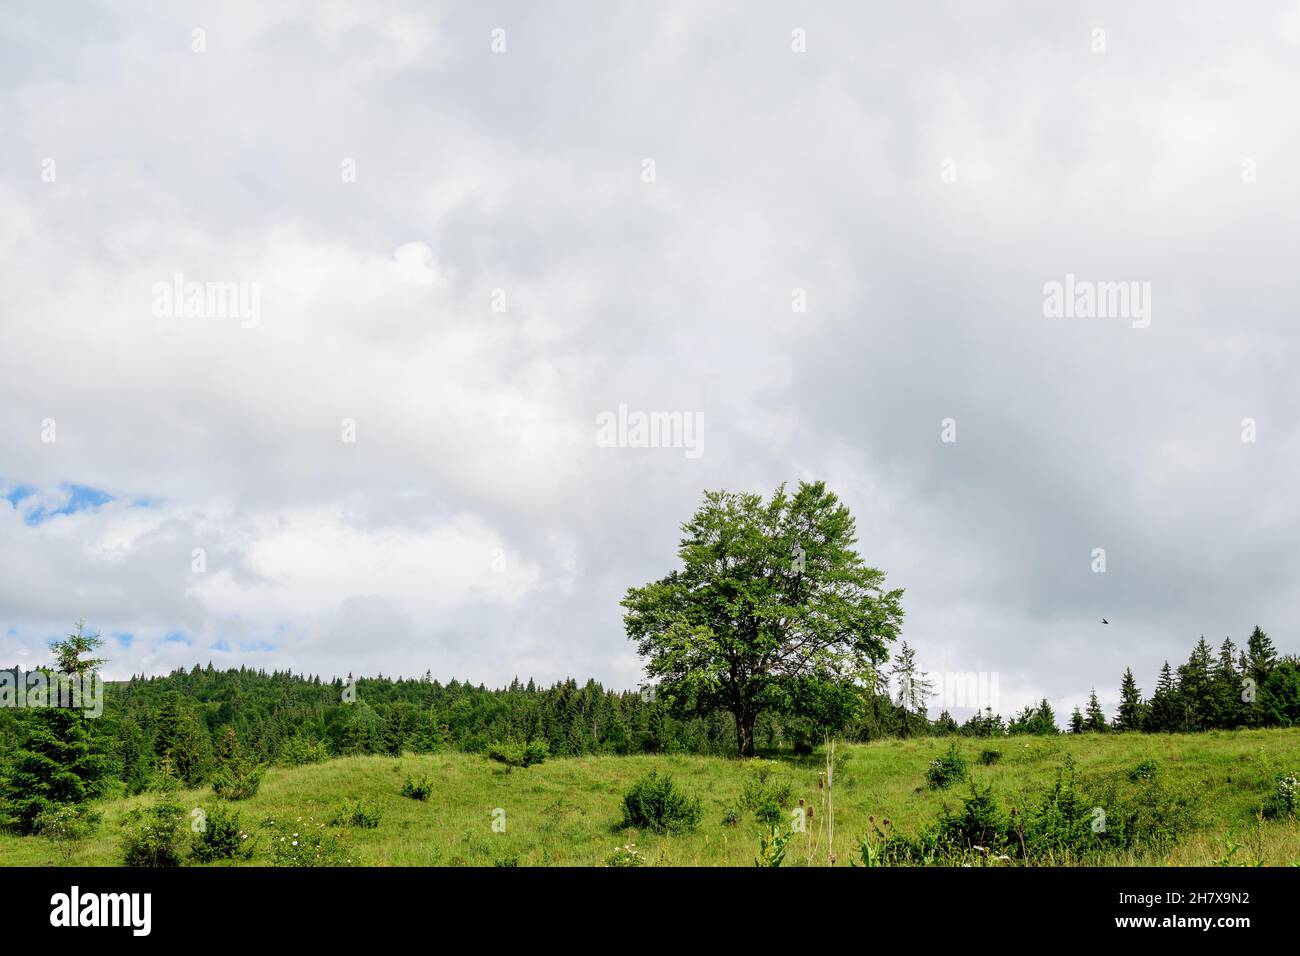 Landscape with many large green trees and fir trees in a forest at at mountains, in a sunny summer day, beautiful outdoor monochrome background Stock Photo